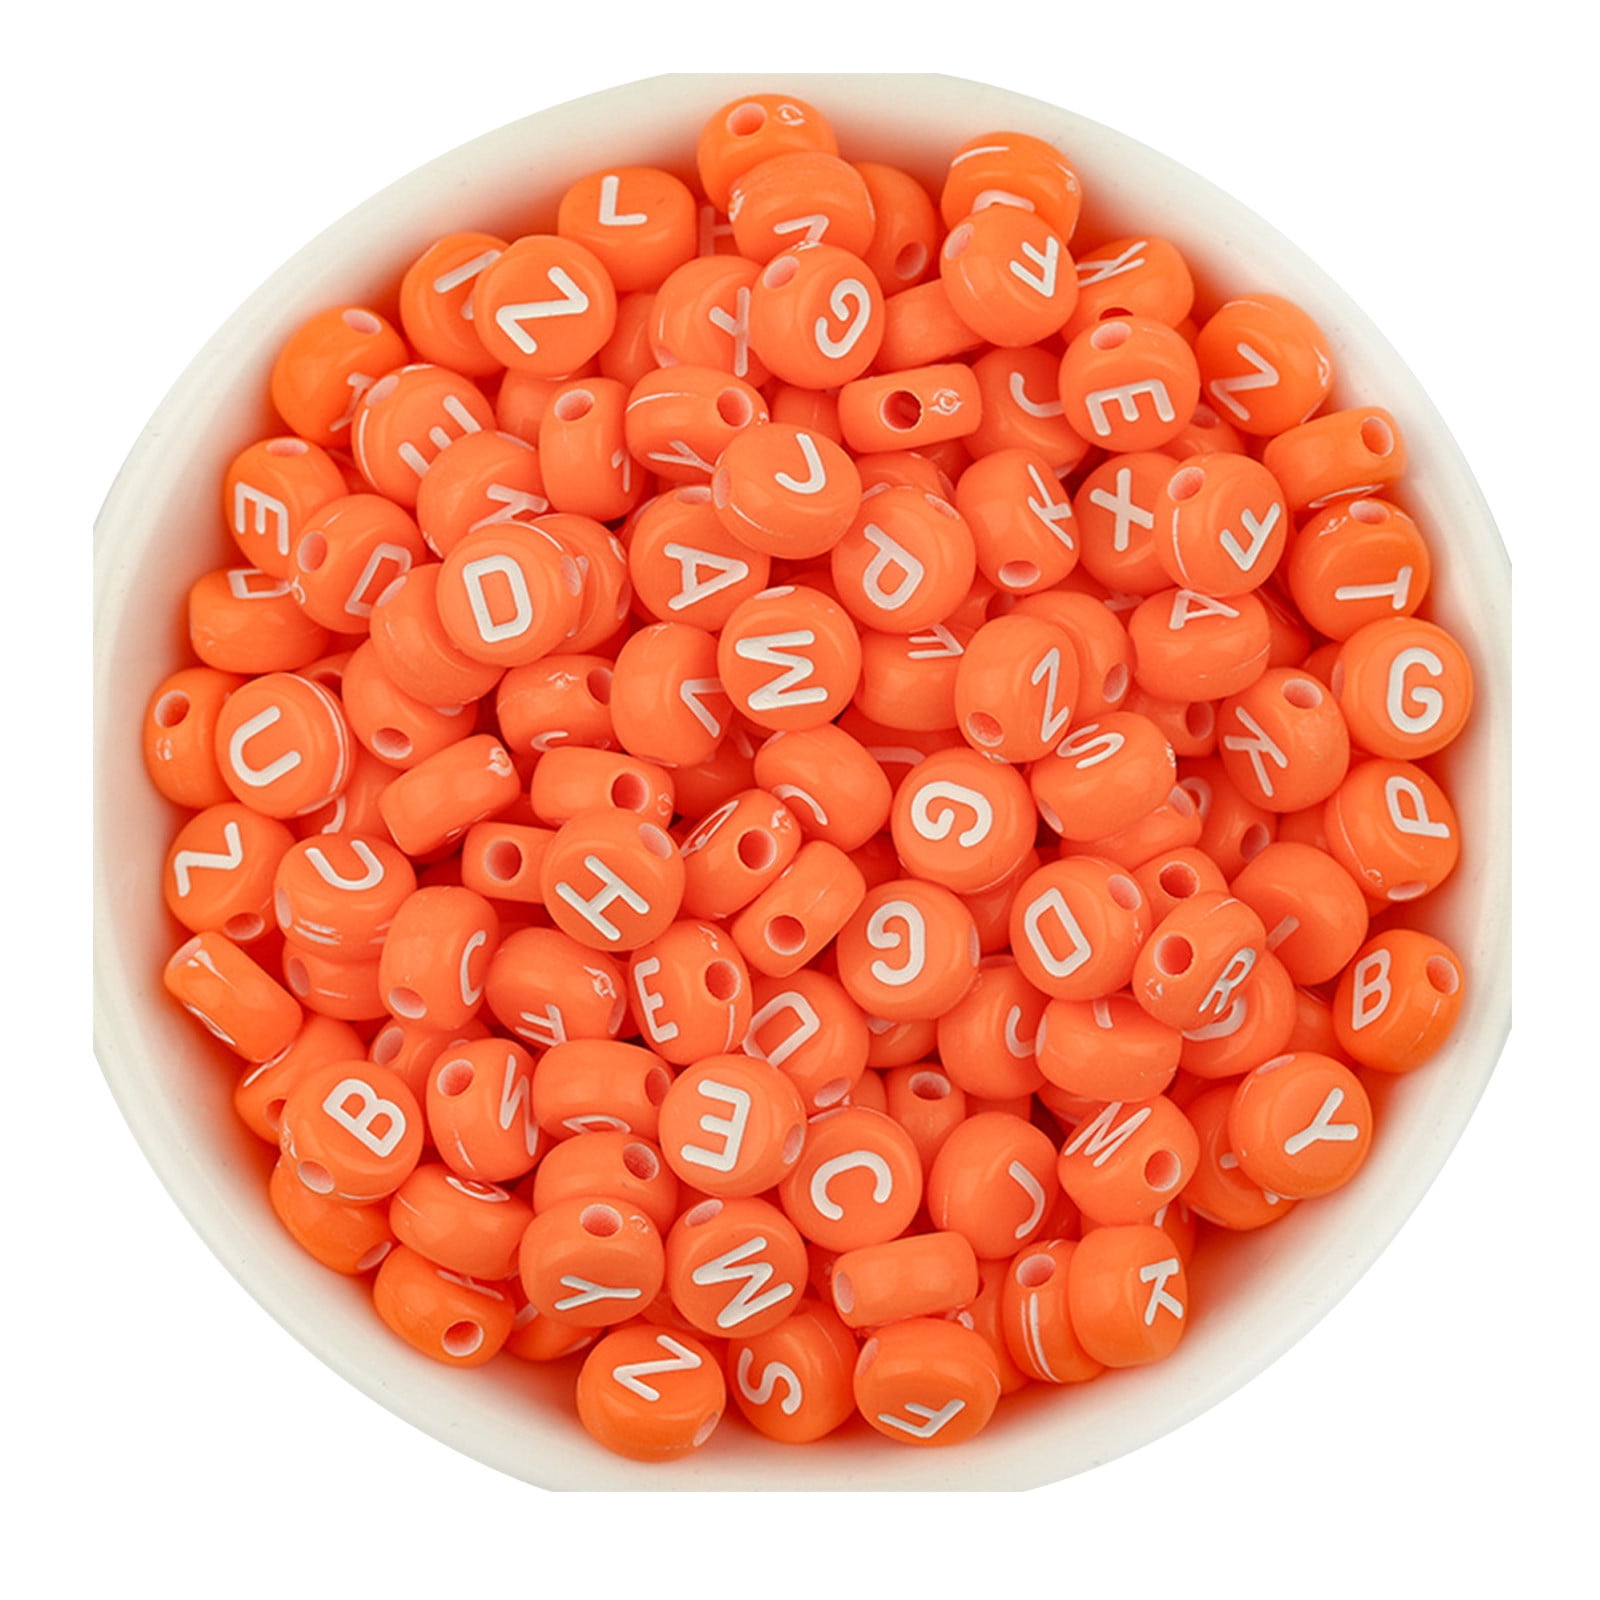 TUTUnaumb New Hot on Sale Acrylic Color Letter Beads For Jewelry